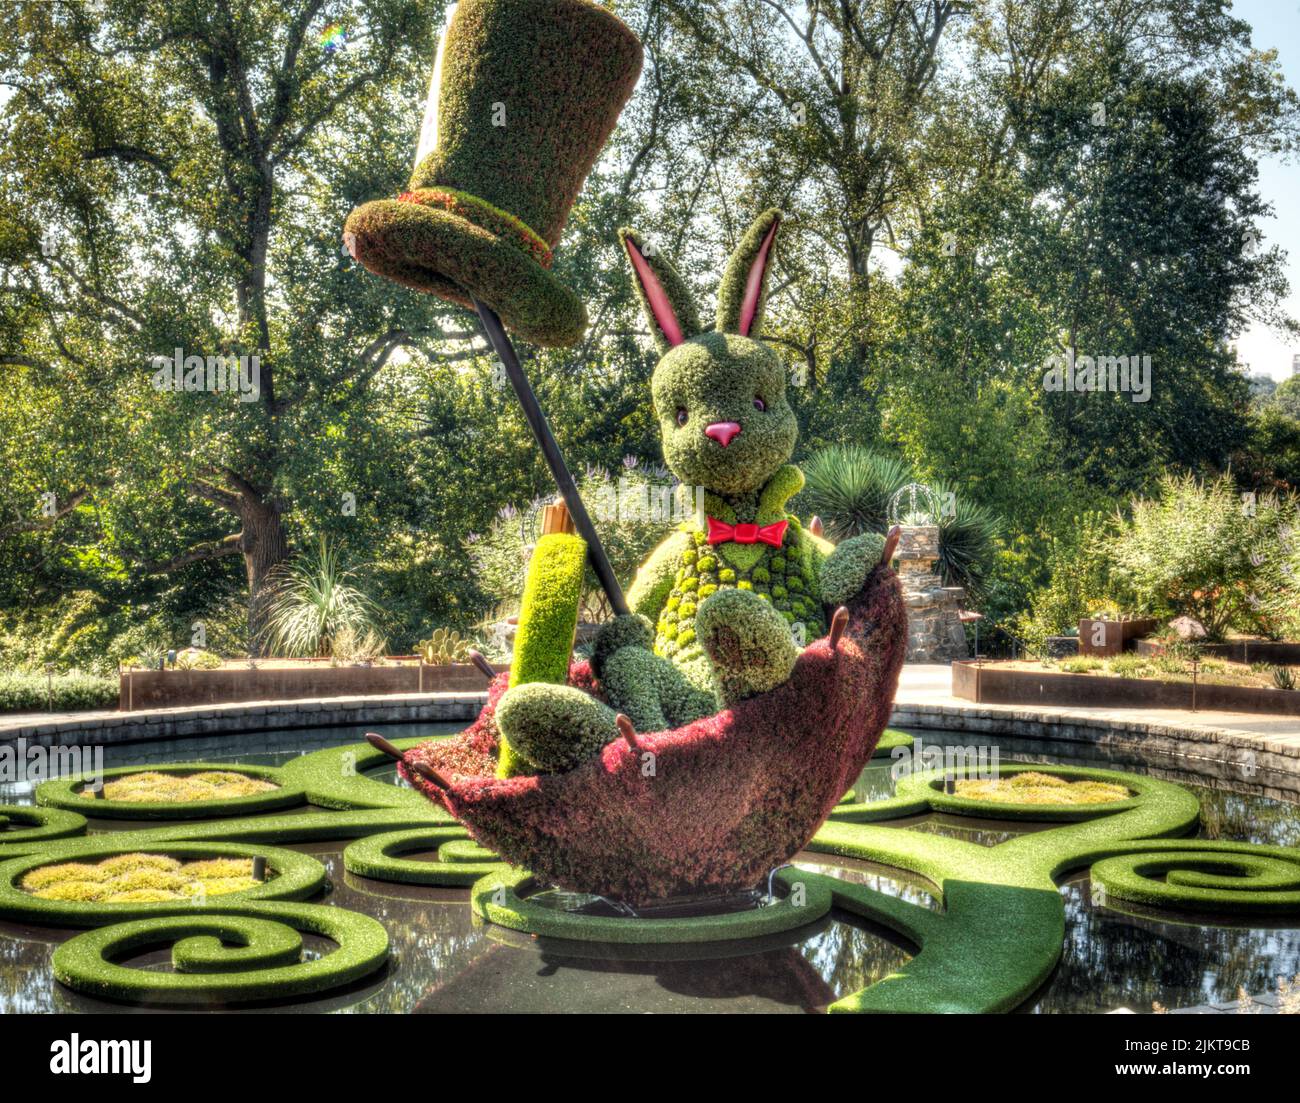 The Bunny flower sculpture at the Atlanta Botanical Gardens in the USA Stock Photo